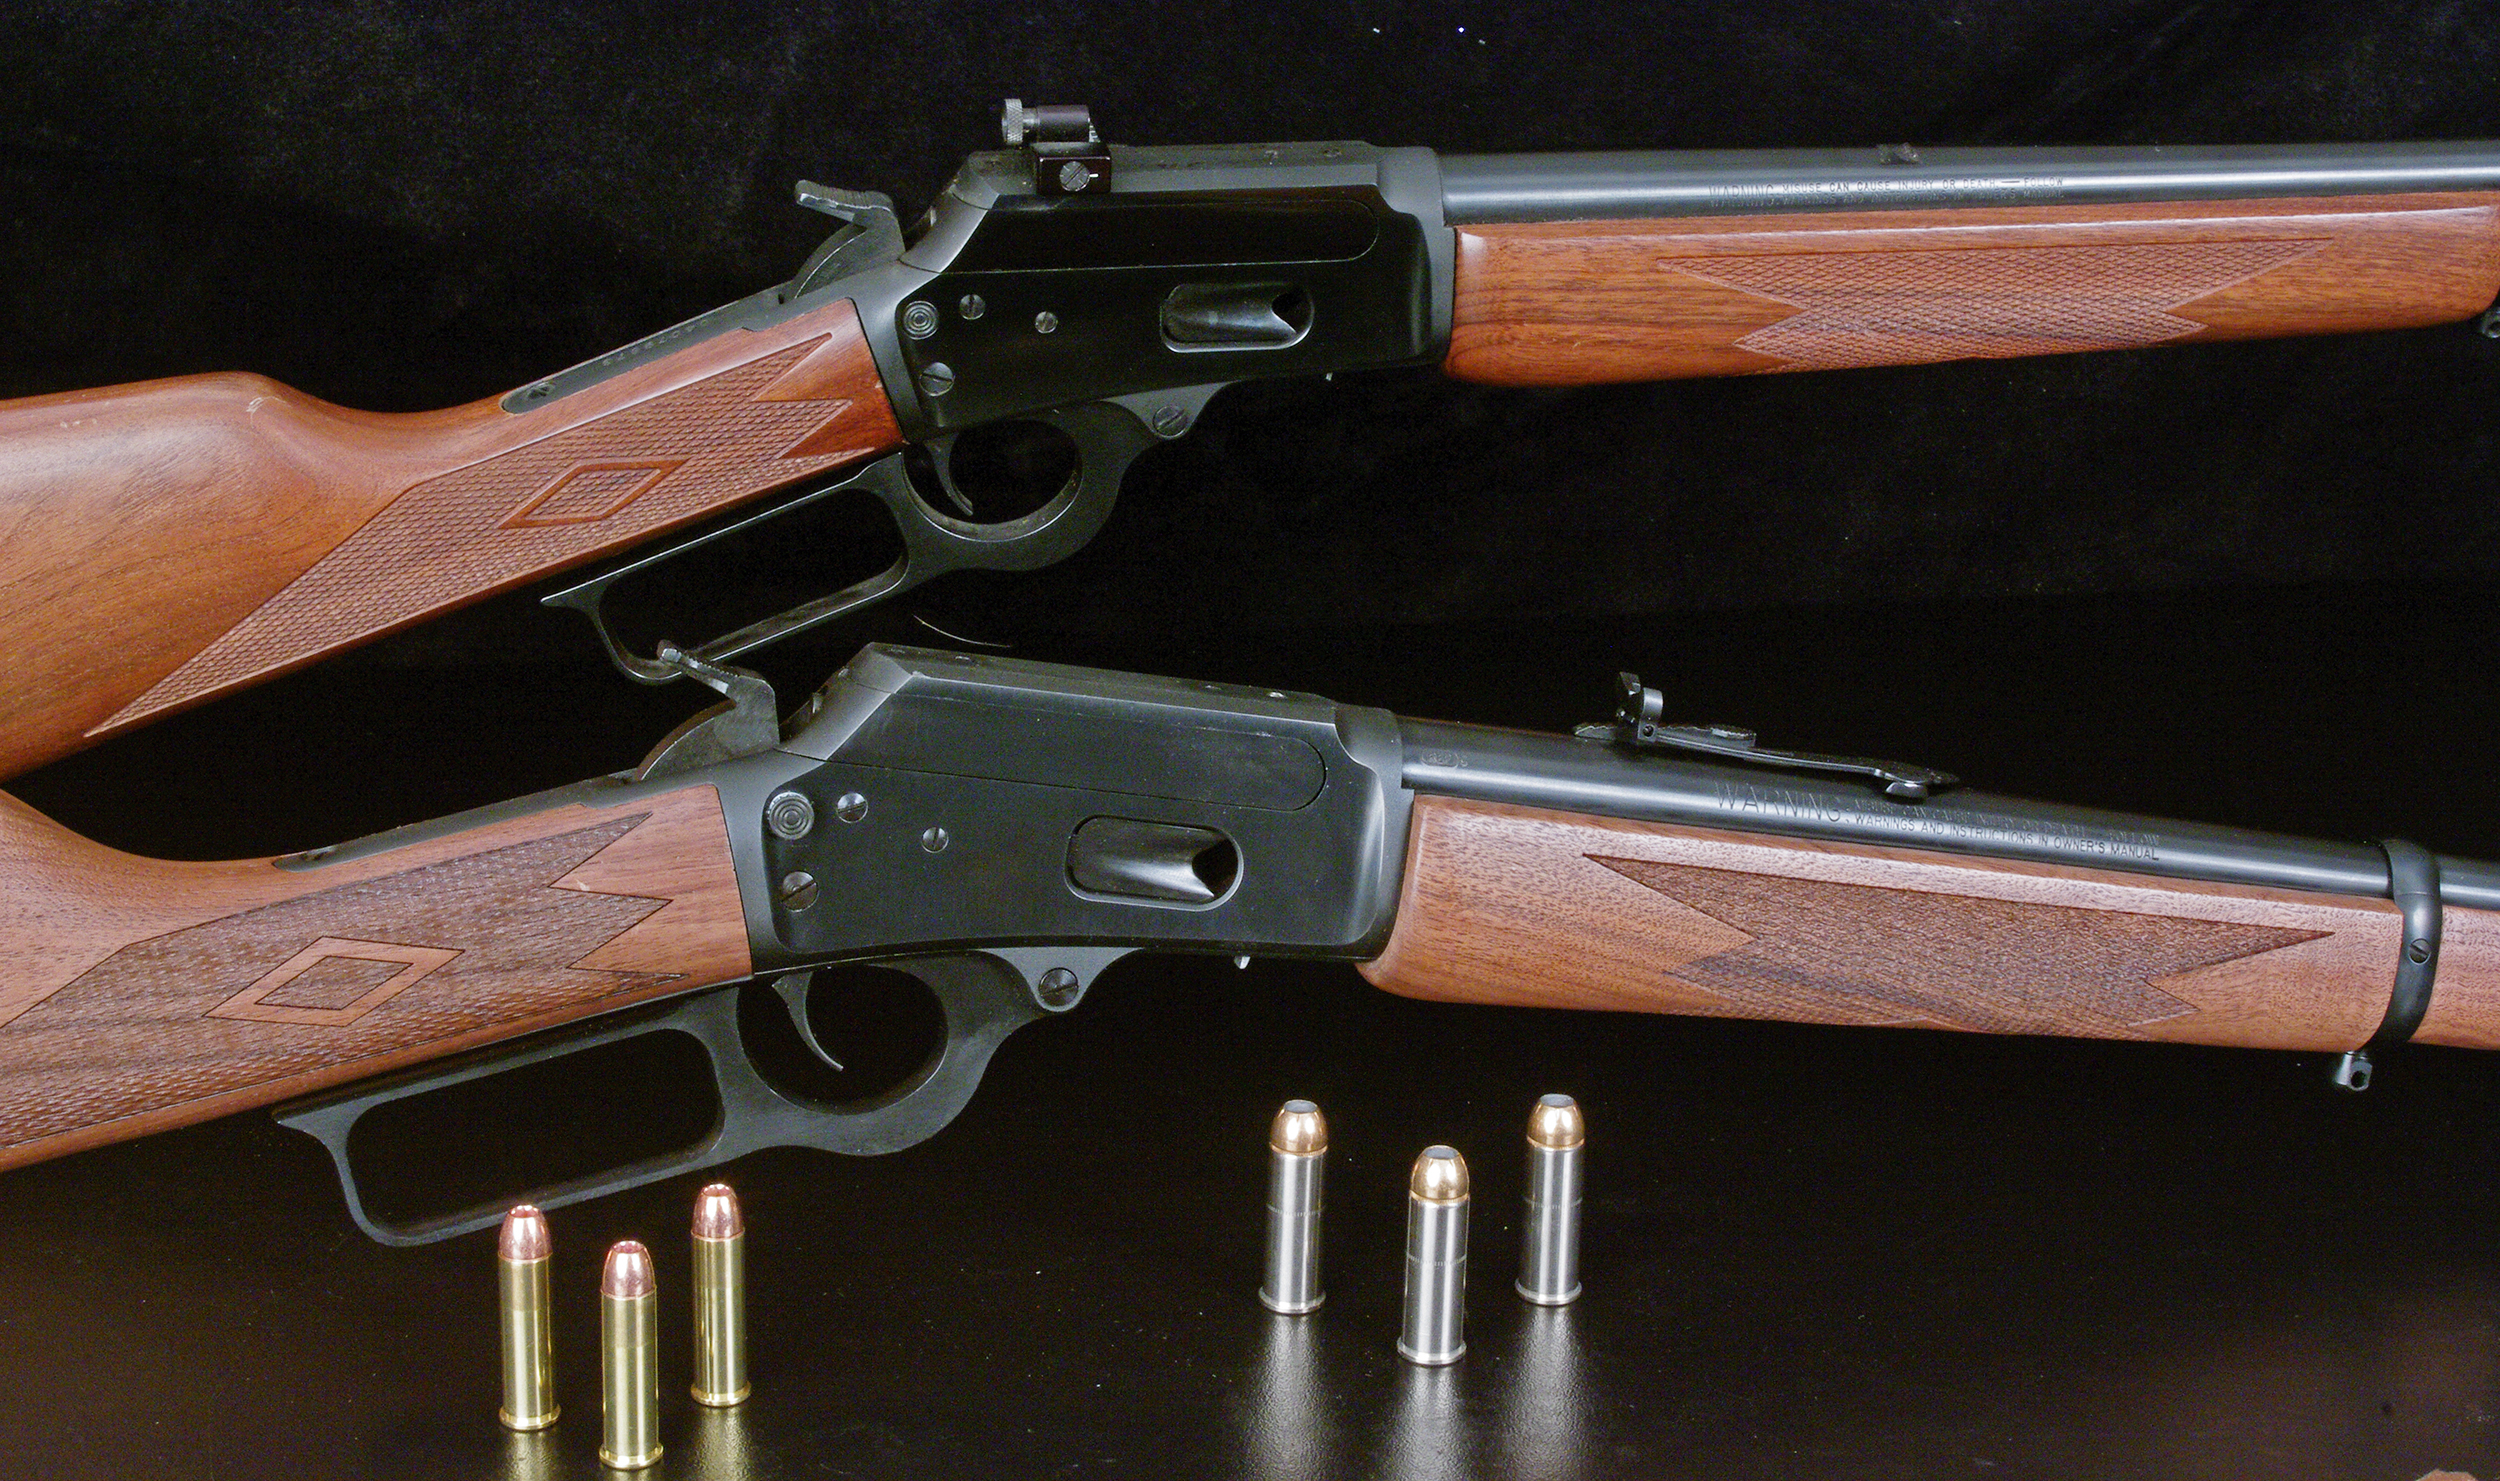 A pair of Marlin carbine rifles on a black background.